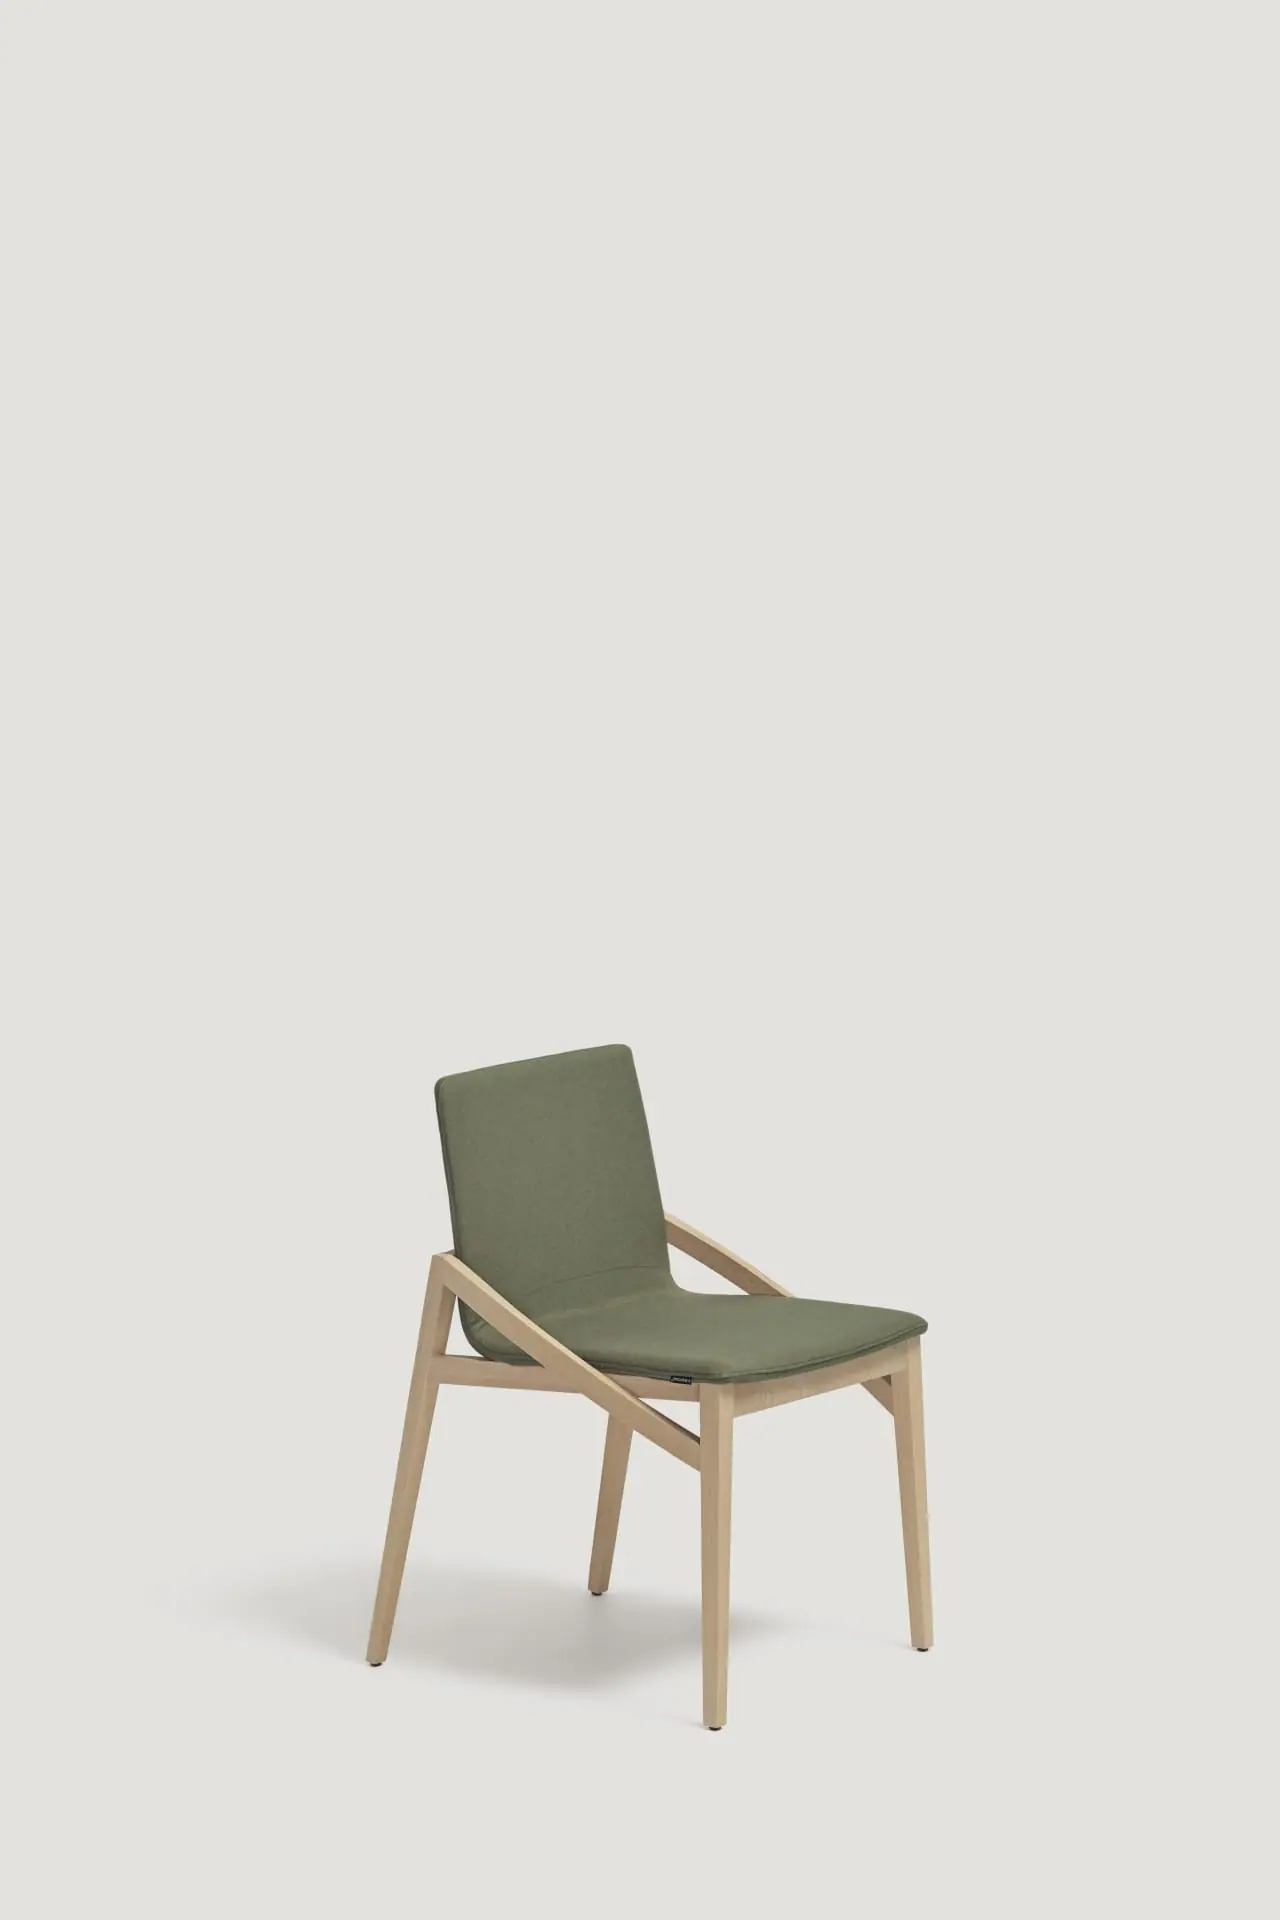 capdell-capita-chair-04